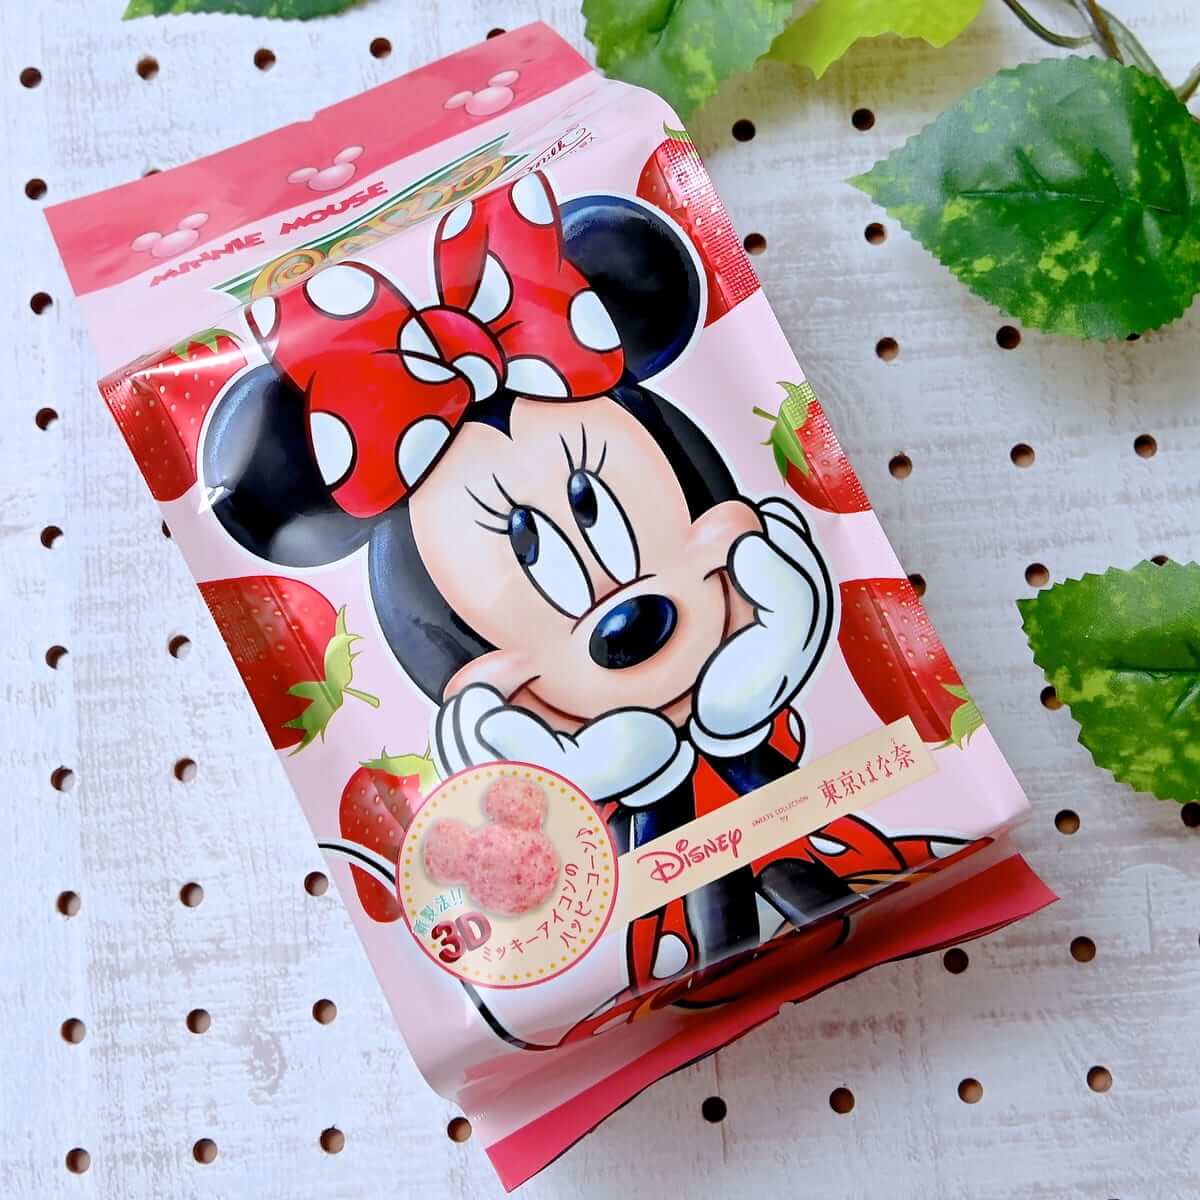 Disney SWEETS COLLECTION by 東京ばな奈『ミニーマウス/コーン いちごミルク味』袋